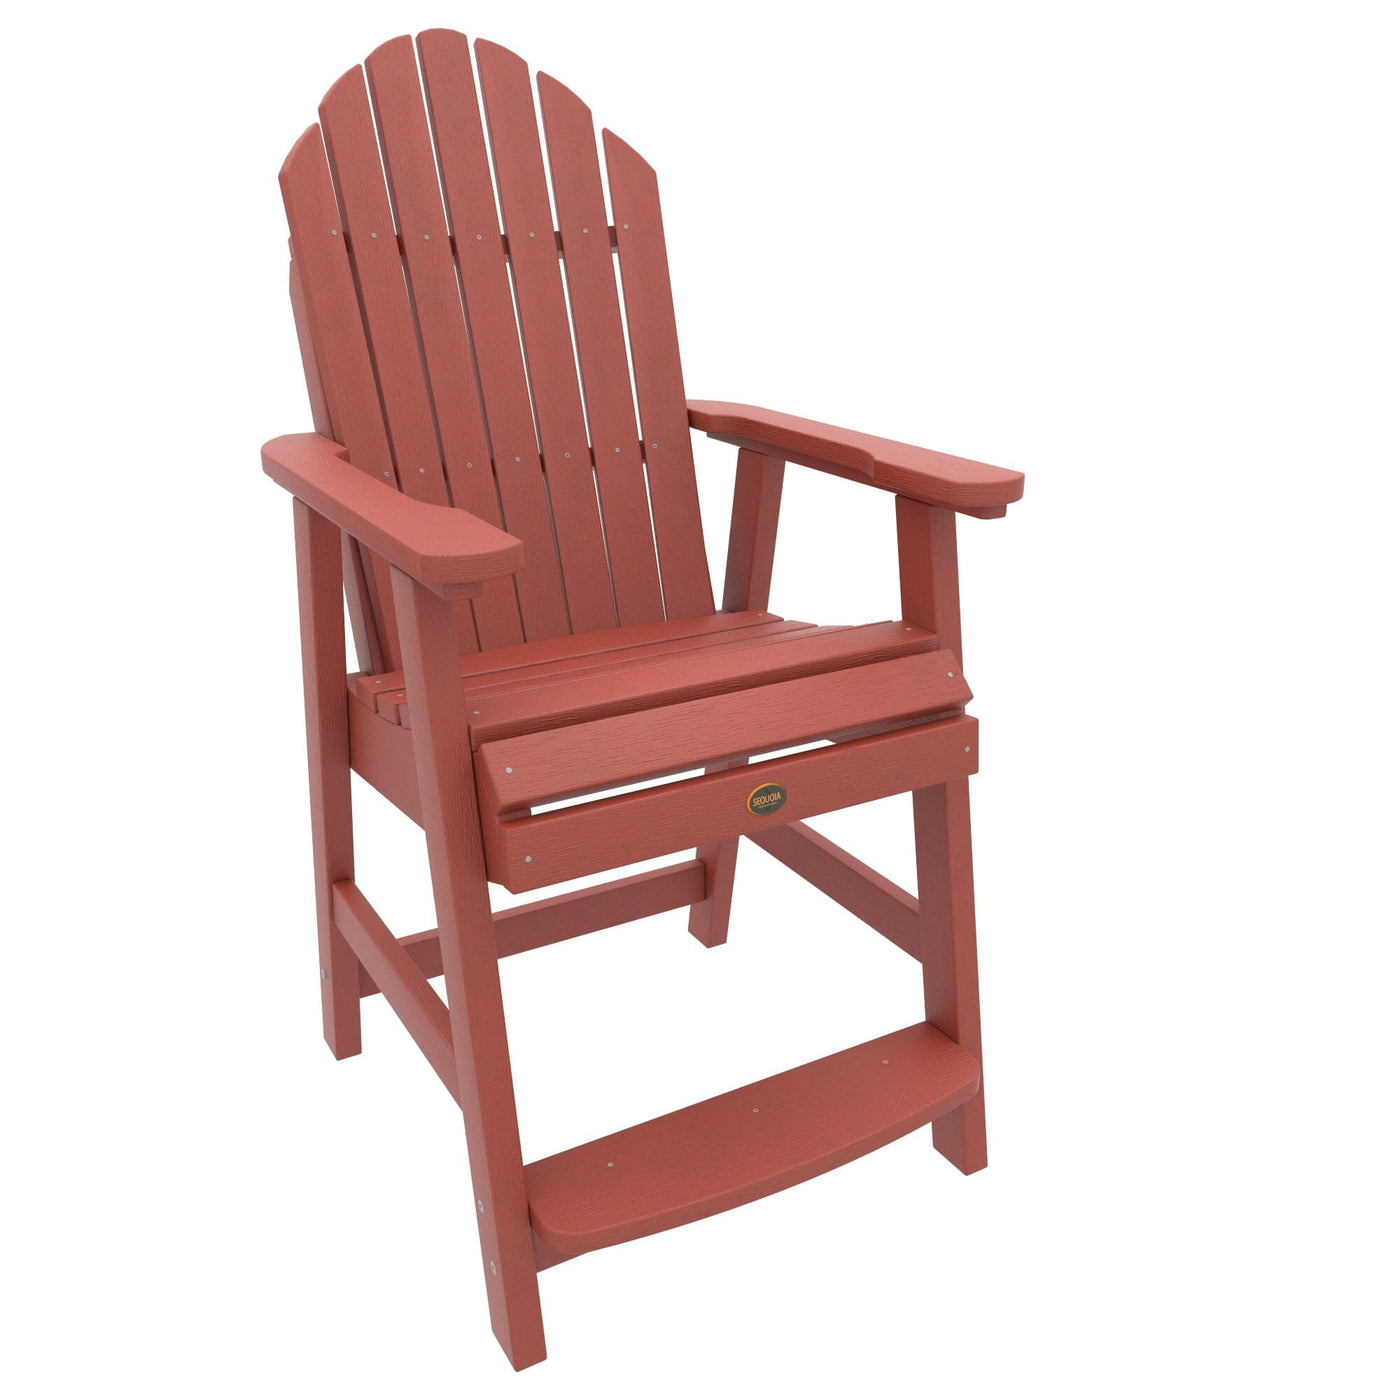 Commercial Grade Muskoka Adirondack Deck Dining Chair in Counter Height Adirondack Chairs Sequoia Professional Rustic Red 